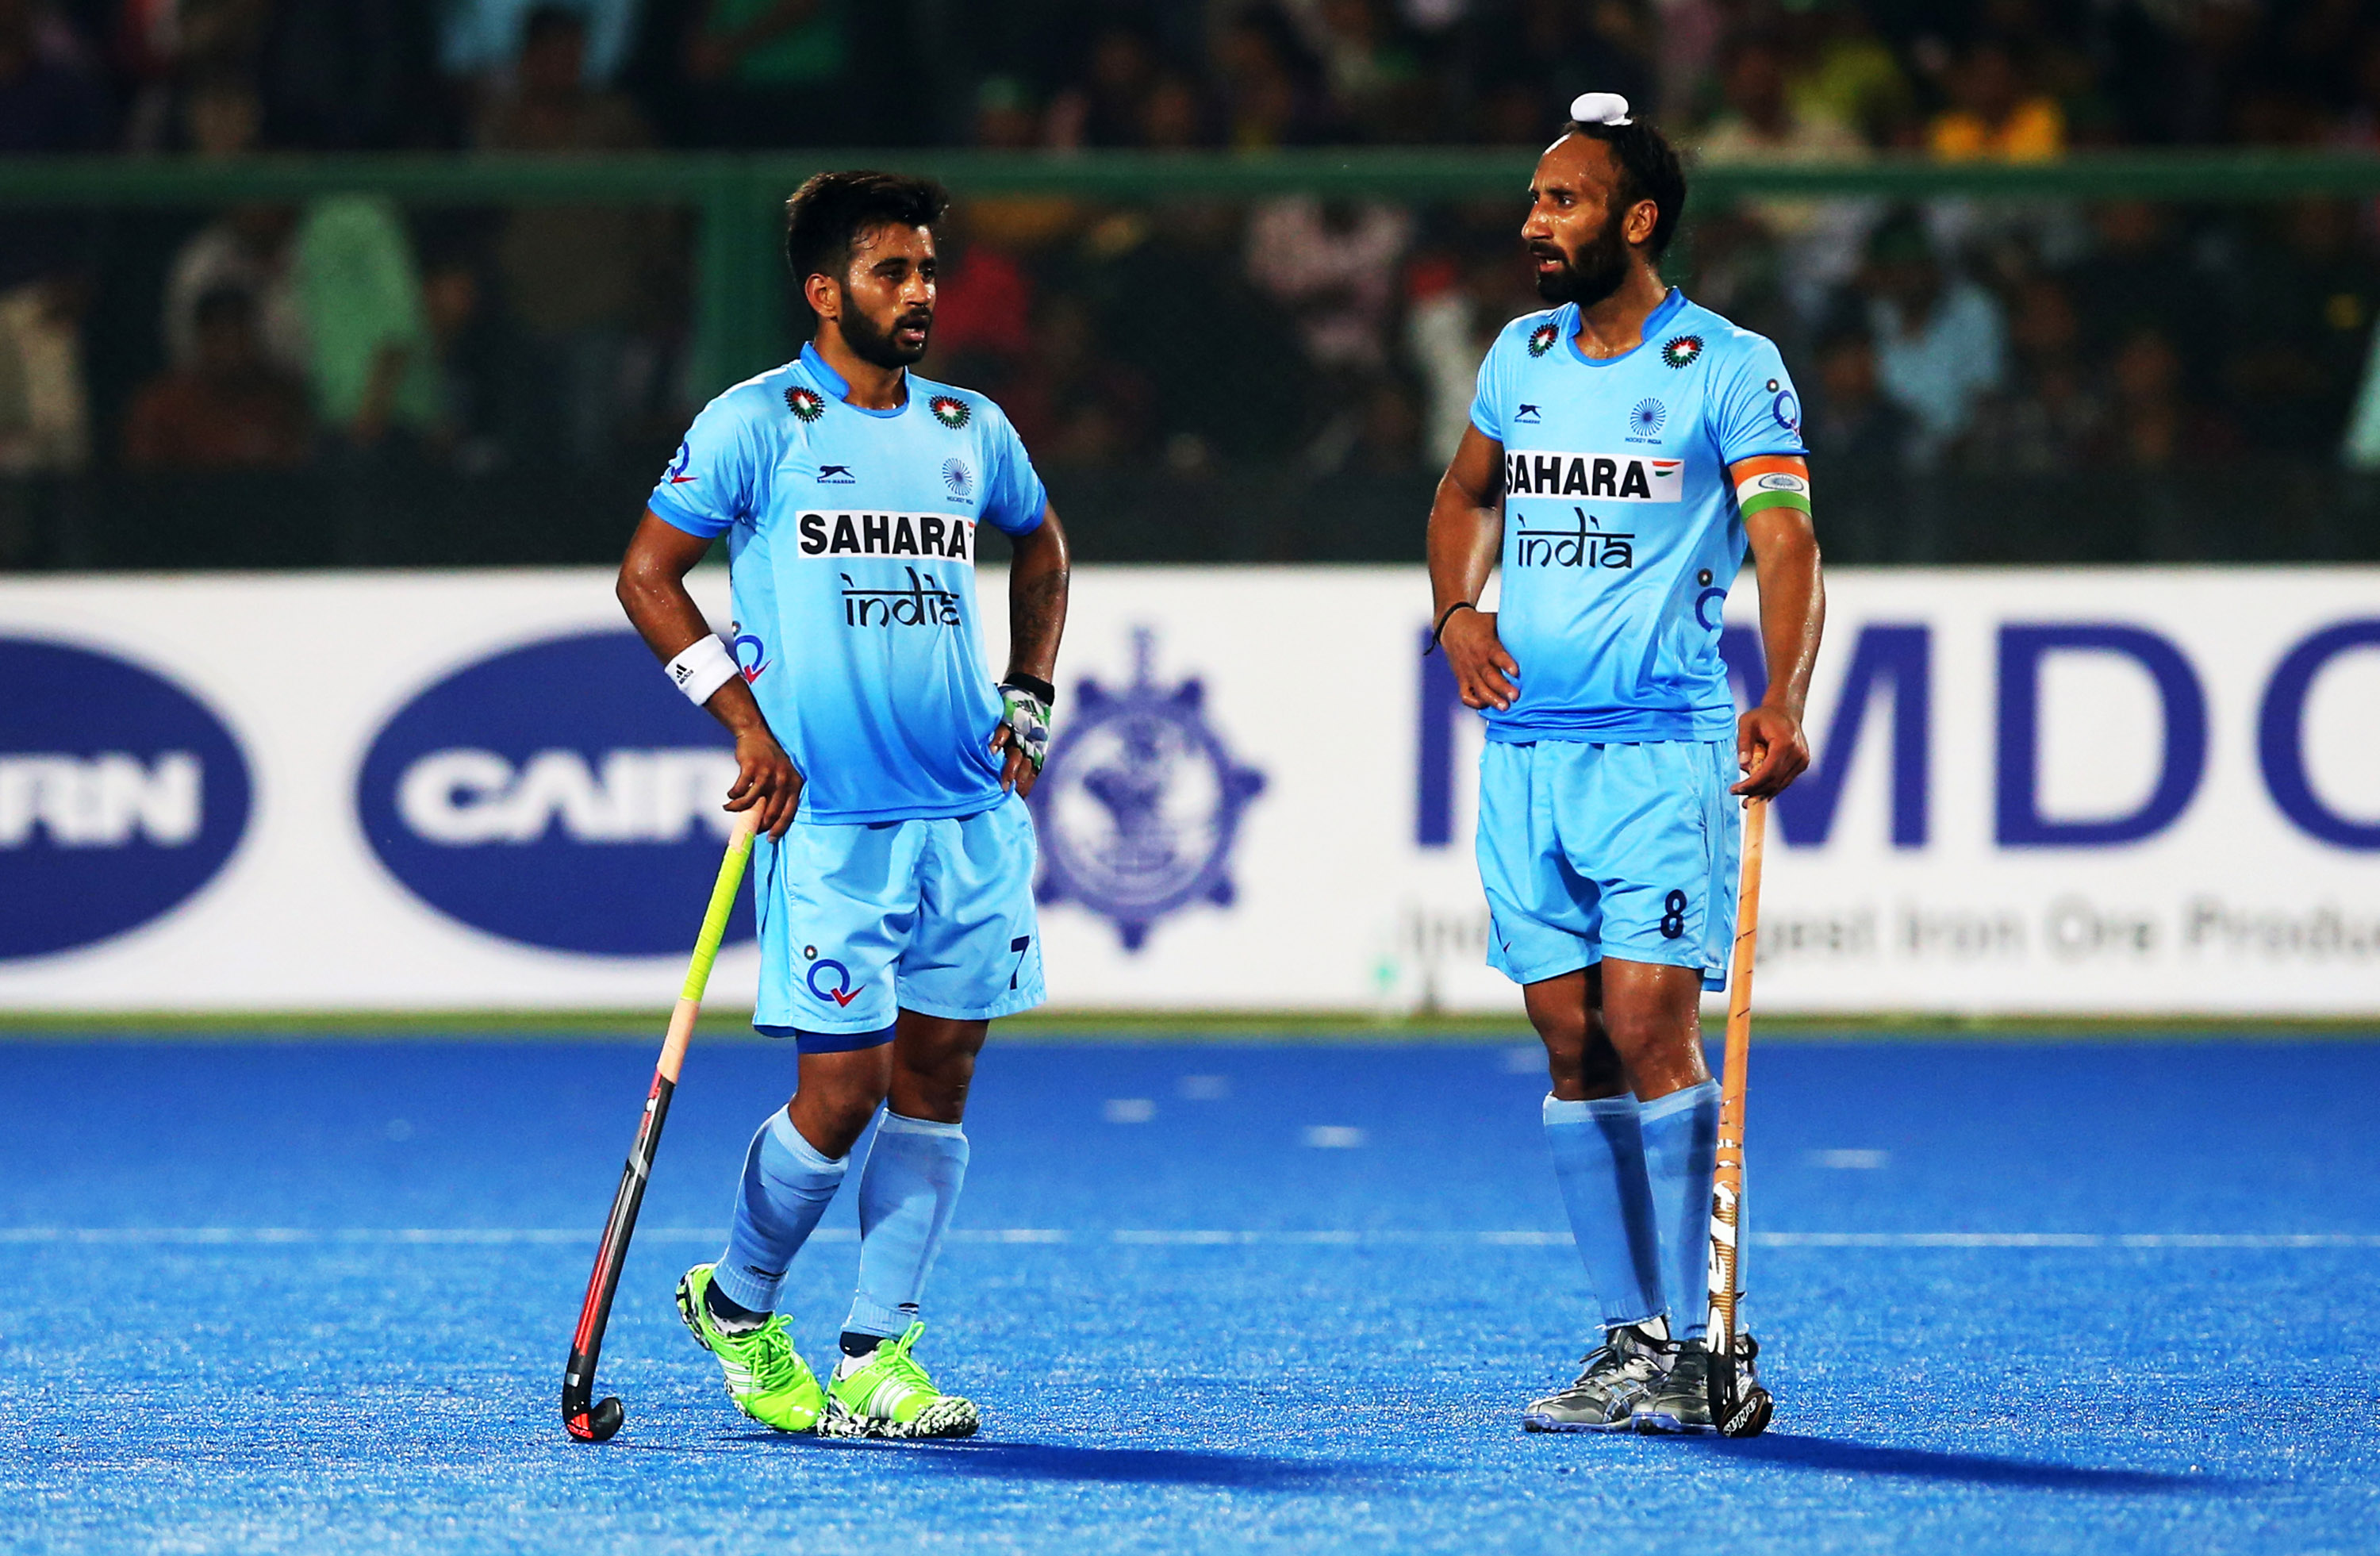 Sardar Singh’s presence will give a lot of motivation to others, says Manpreet Singh